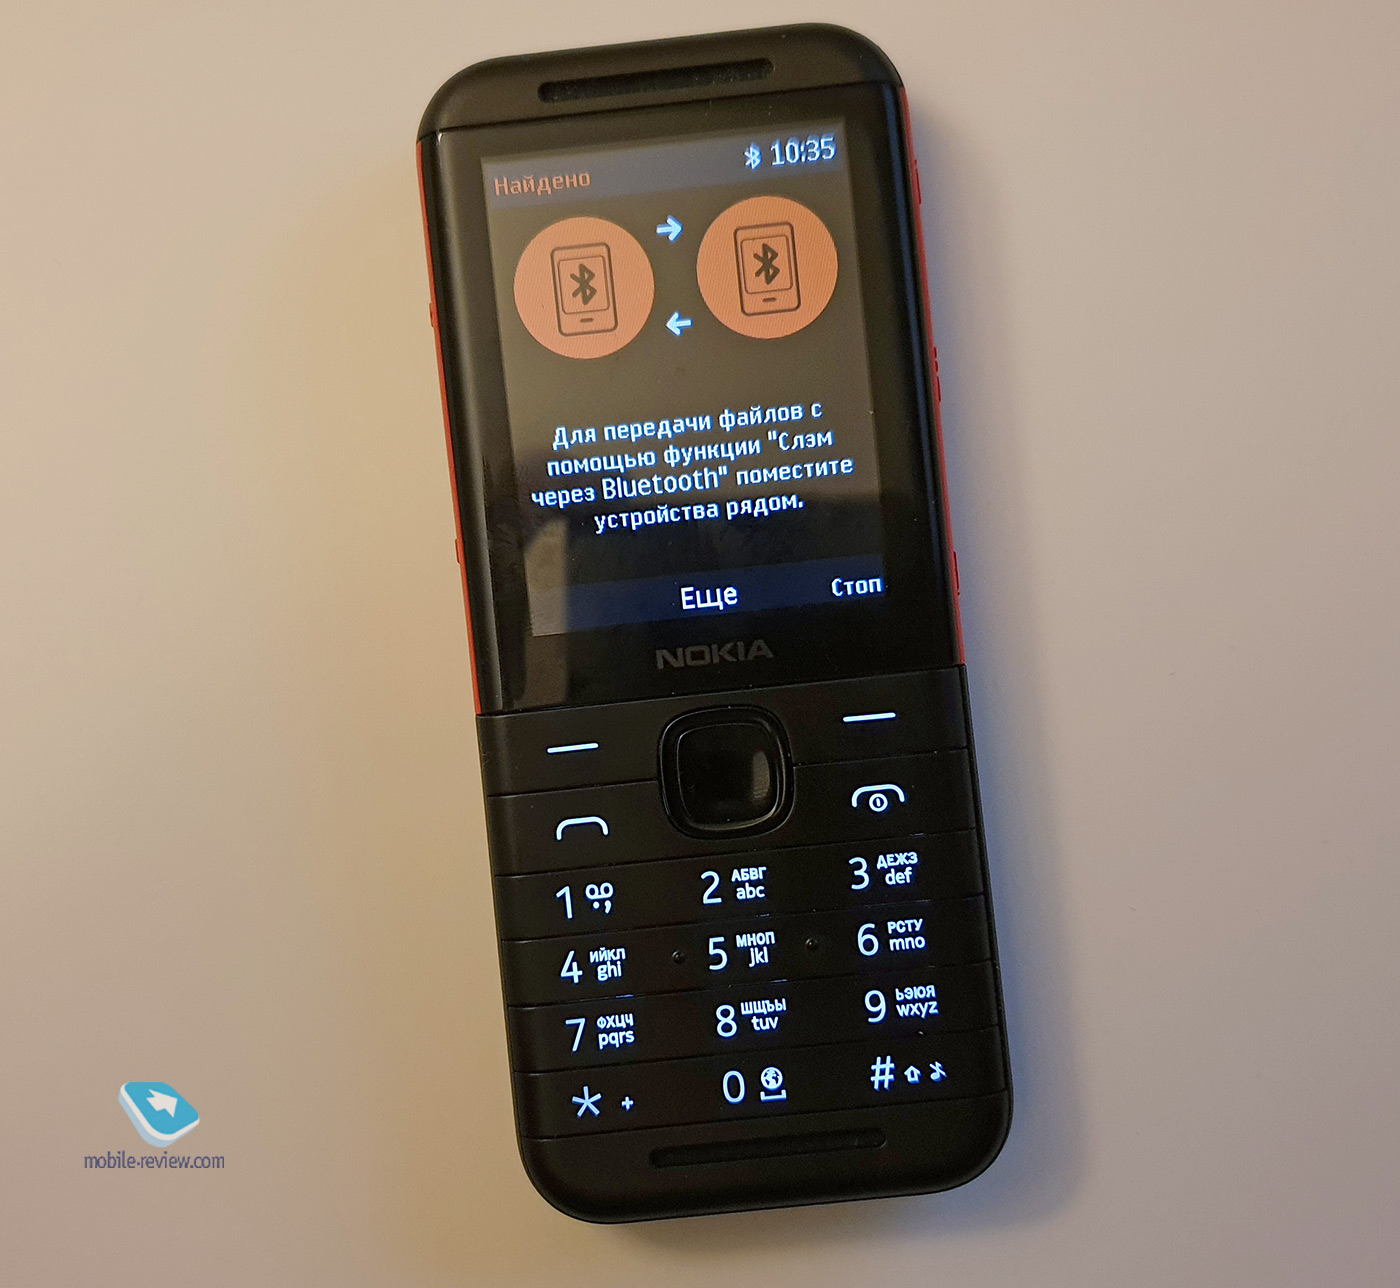 Review of the new Nokia 5310 XpressMusic